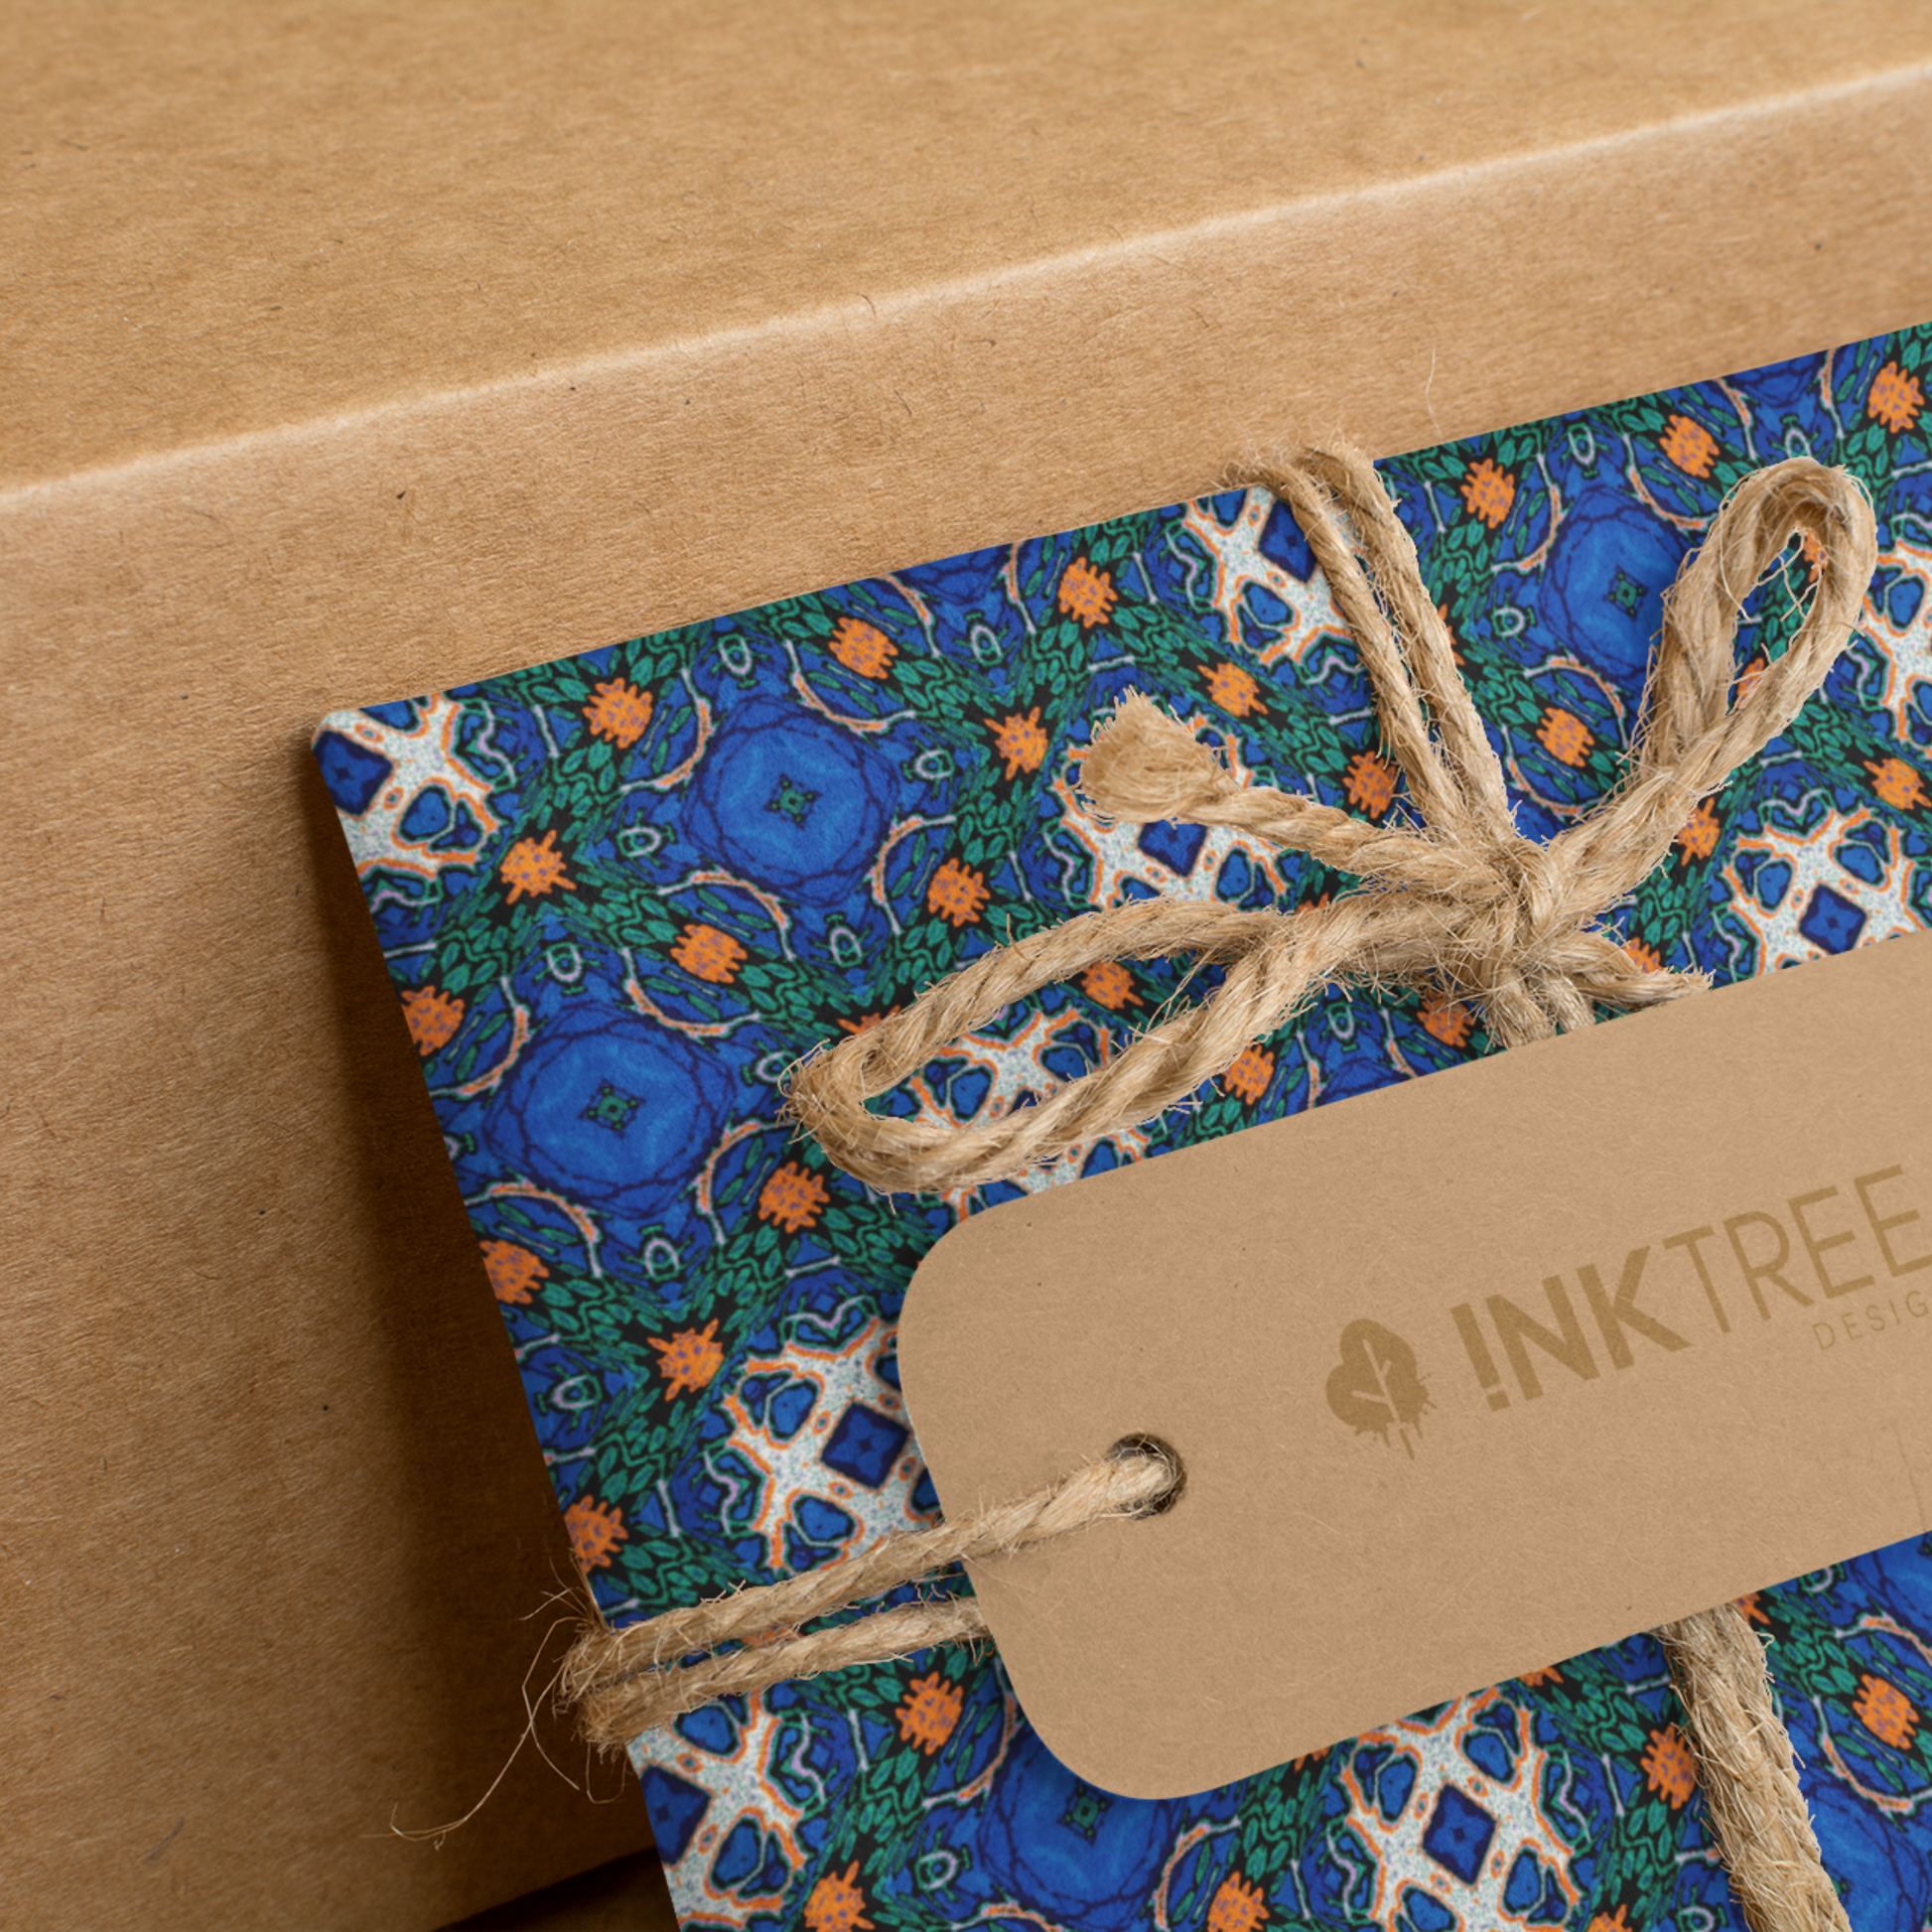 A present wrapped with an orange, white, black, blue and green pattern, tied with brown string with a brown paper tag with ink tree design logo on it, leaning on a brown paper background.